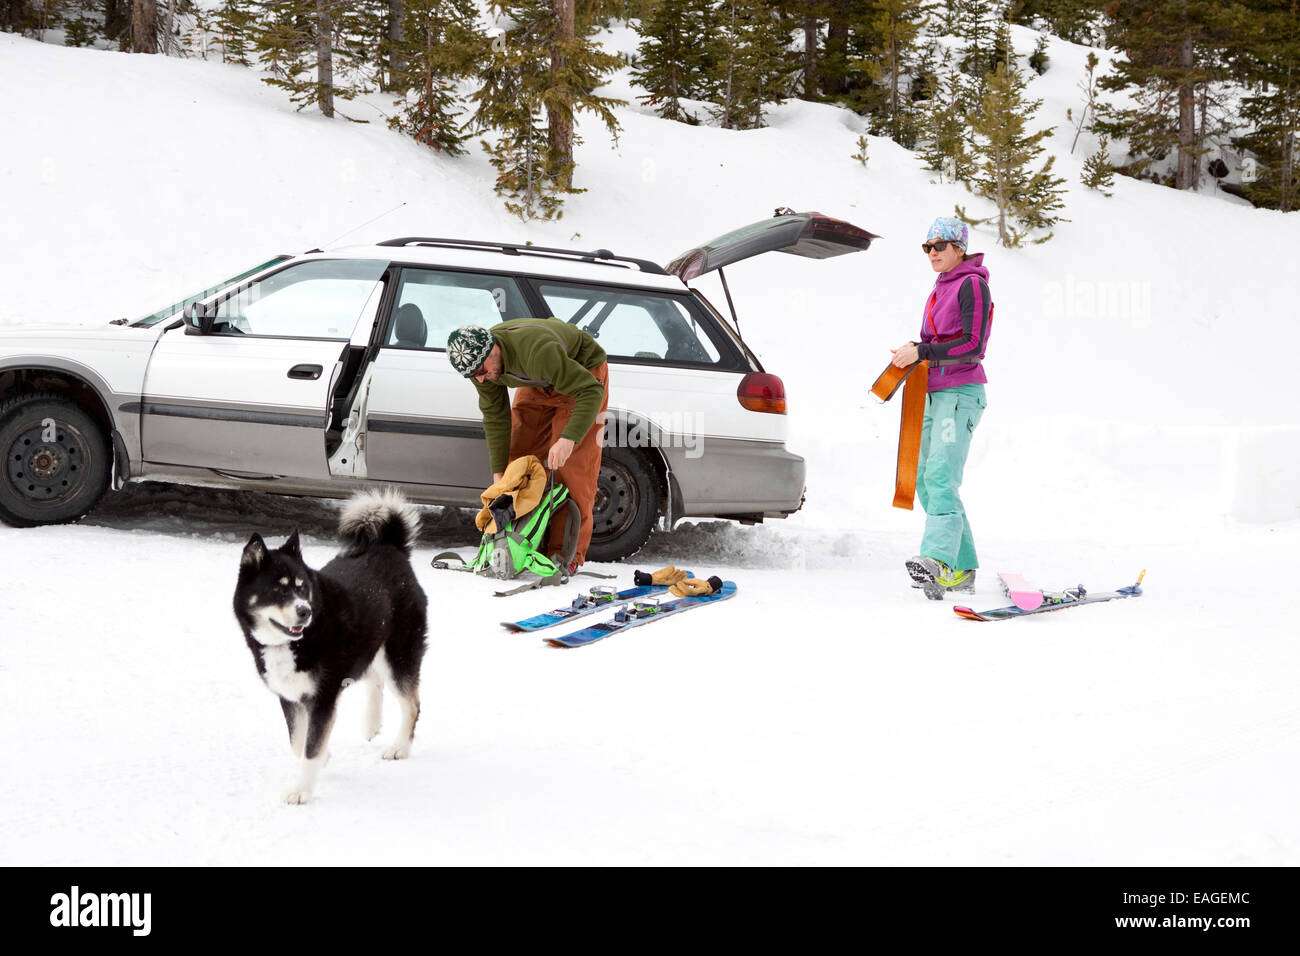 Two backcountry skiers put on their skins before heading in the Beehive Basin near Big Sky, Montana. Stock Photo